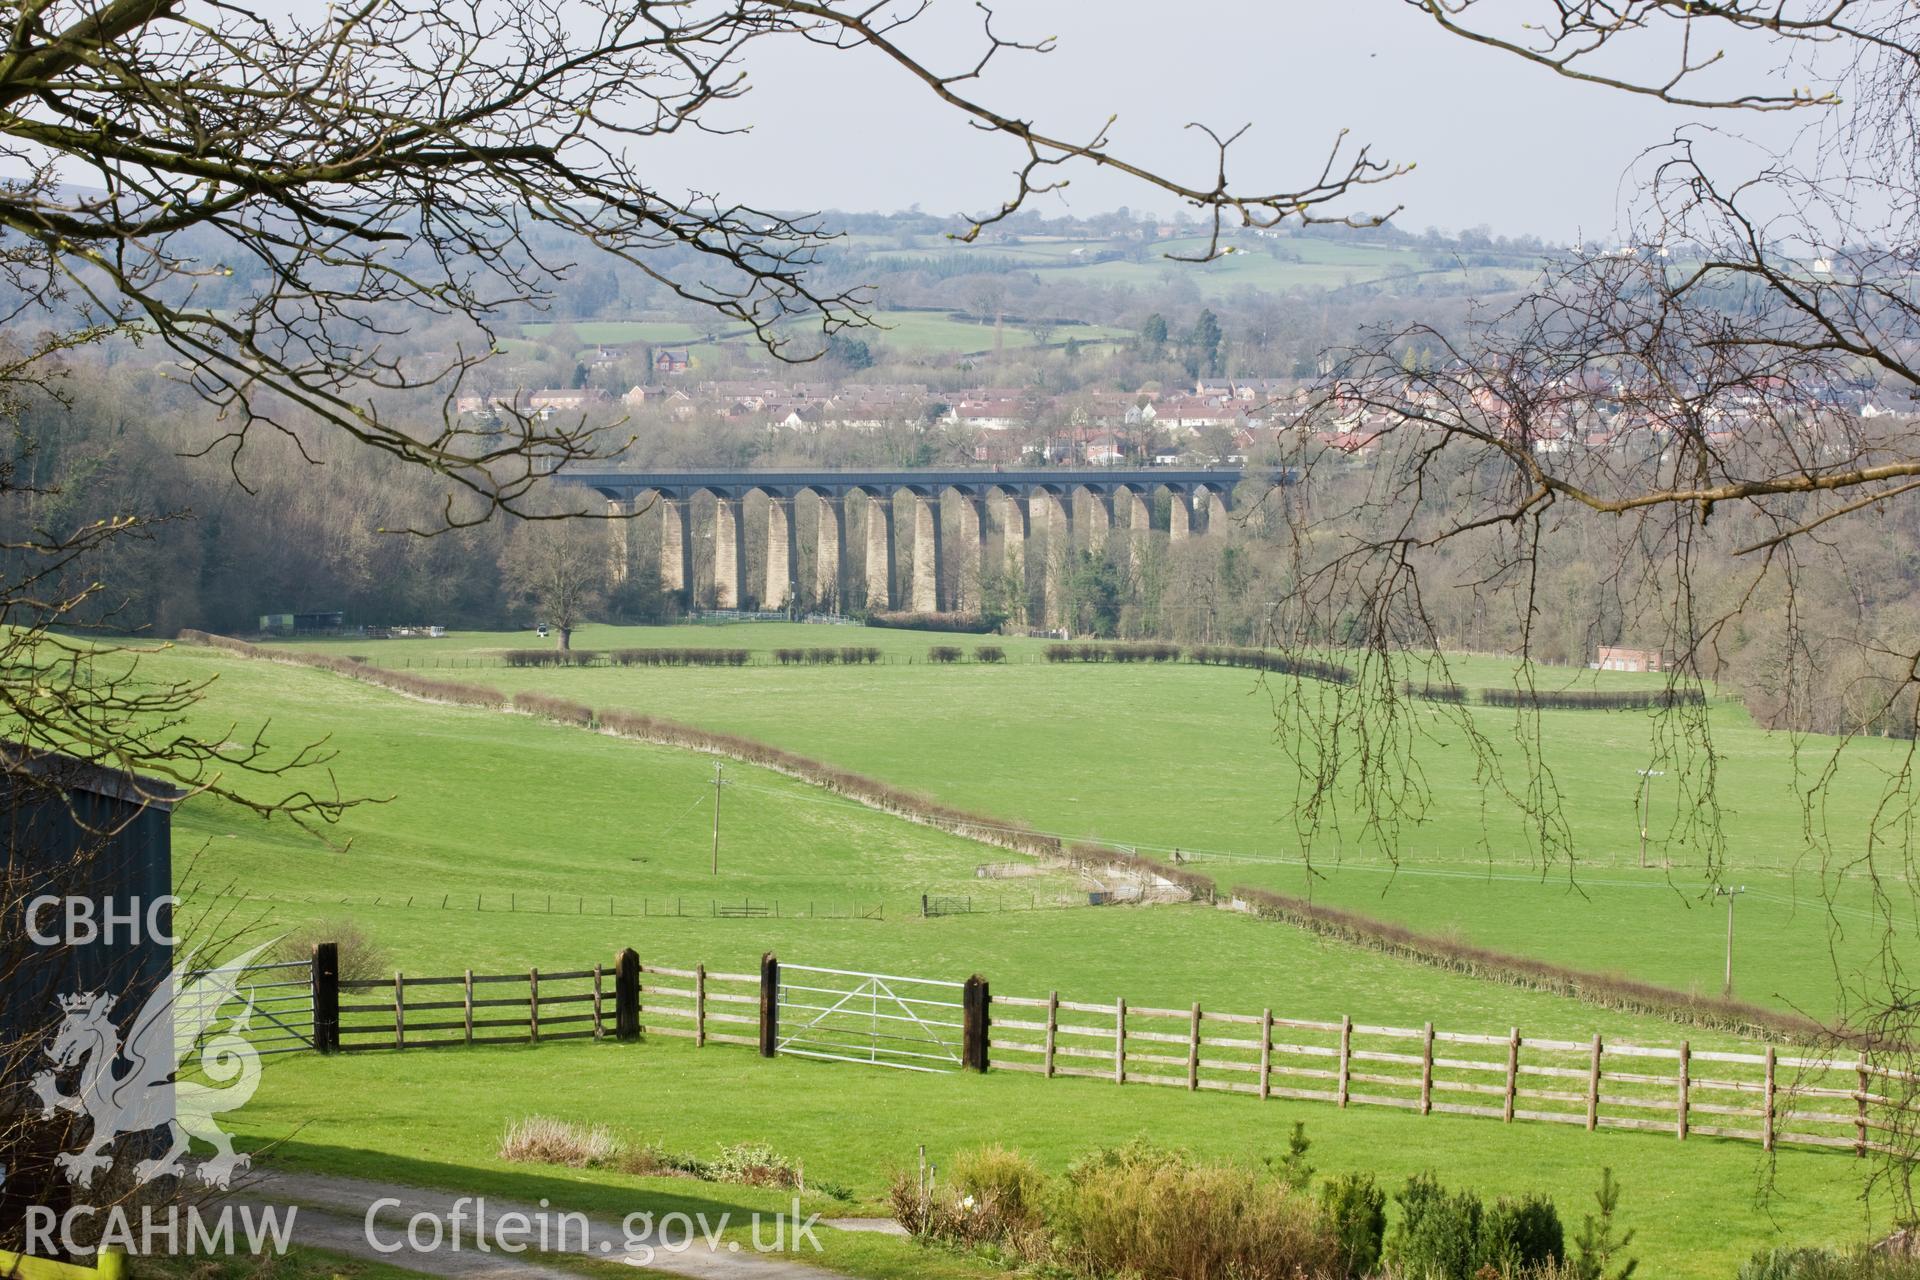 Distant view of the Pontcysyllte aqueduct from the southeast.